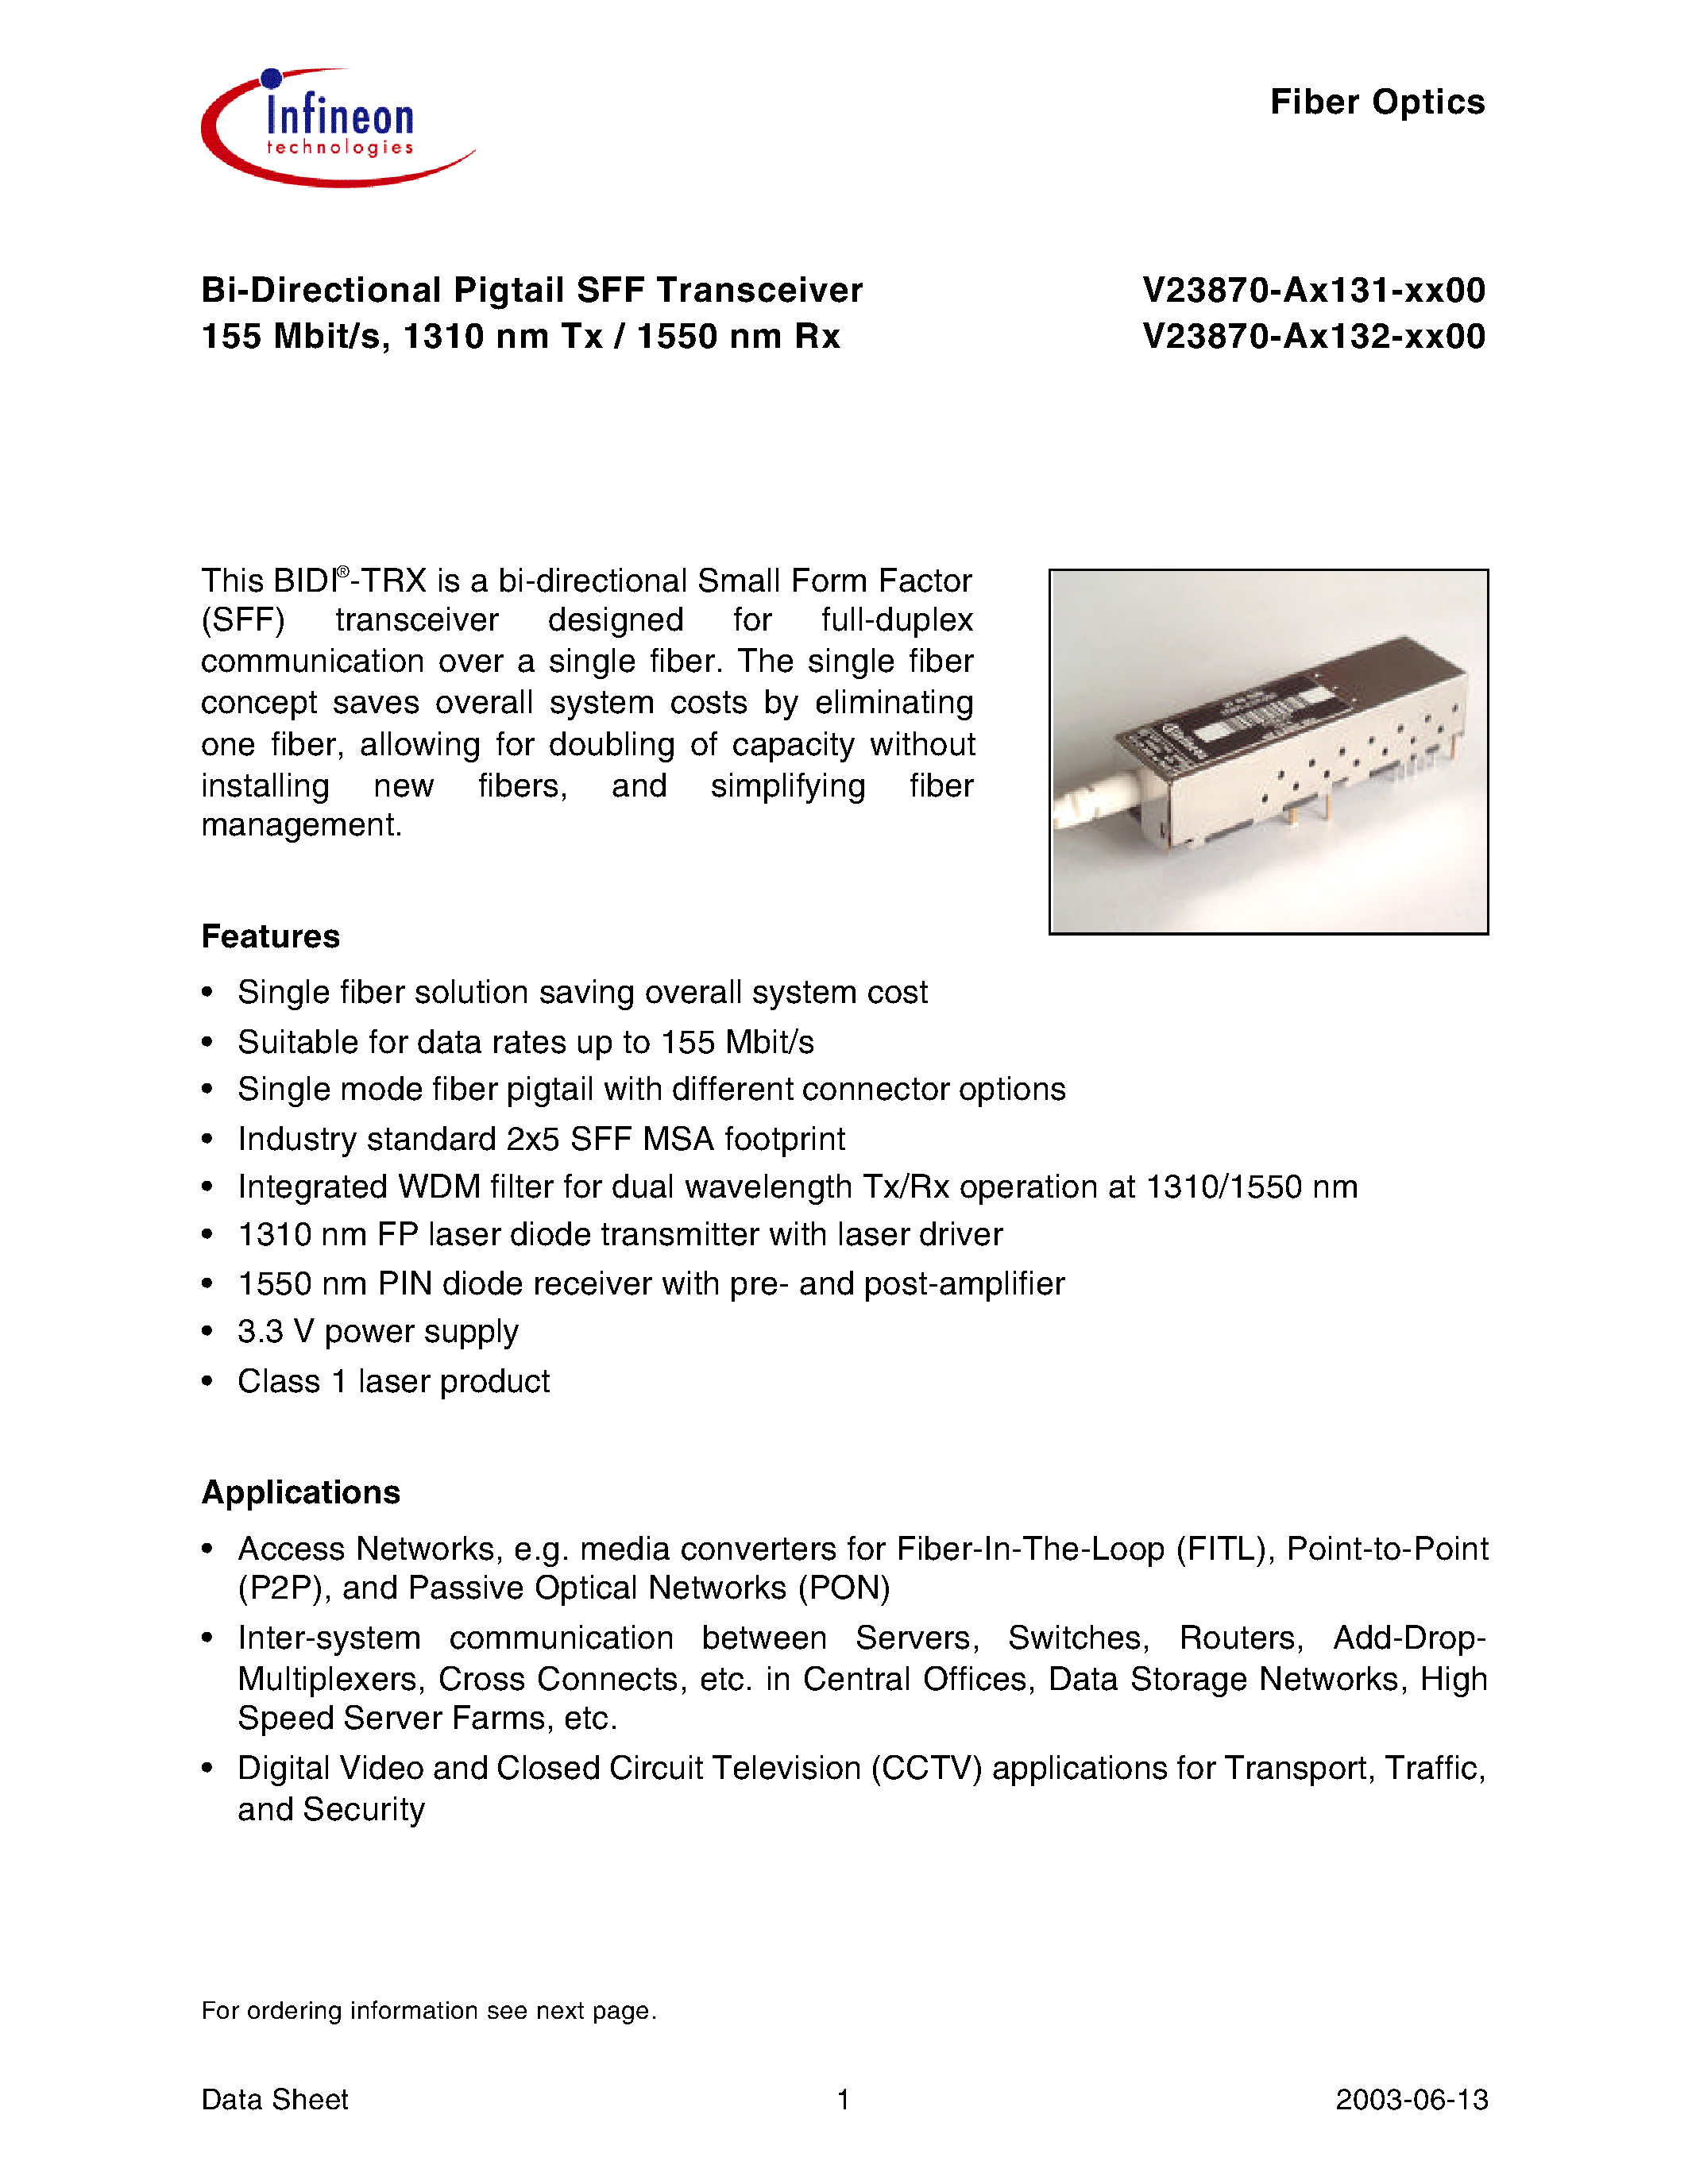 Datasheet V23870-A3131-C500 - Bi-Directional Pigtail SFF Transceiver 155 Mbit/s/ 1310 nm Tx / 1550 nm Rx page 1